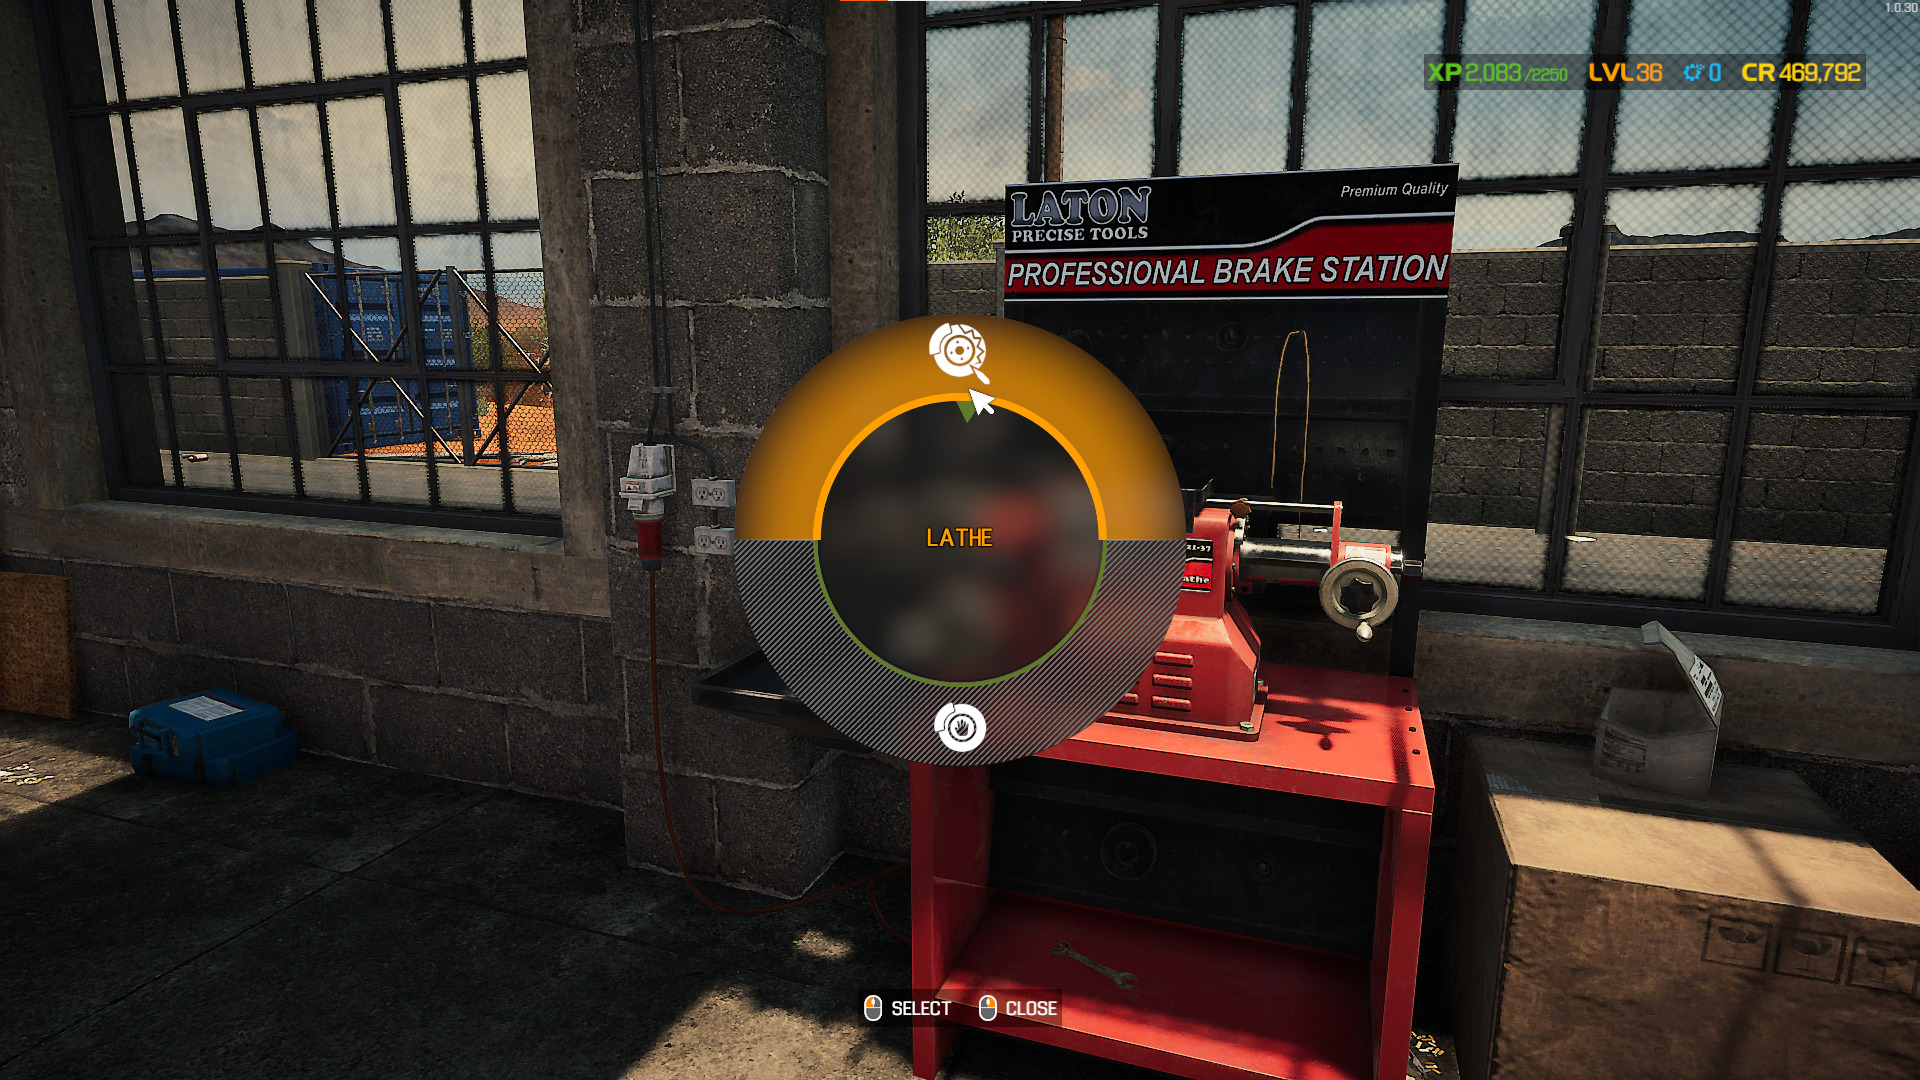 After selecting the Brake Lathe station, select the Lathe option in Car Mechanic Simulator